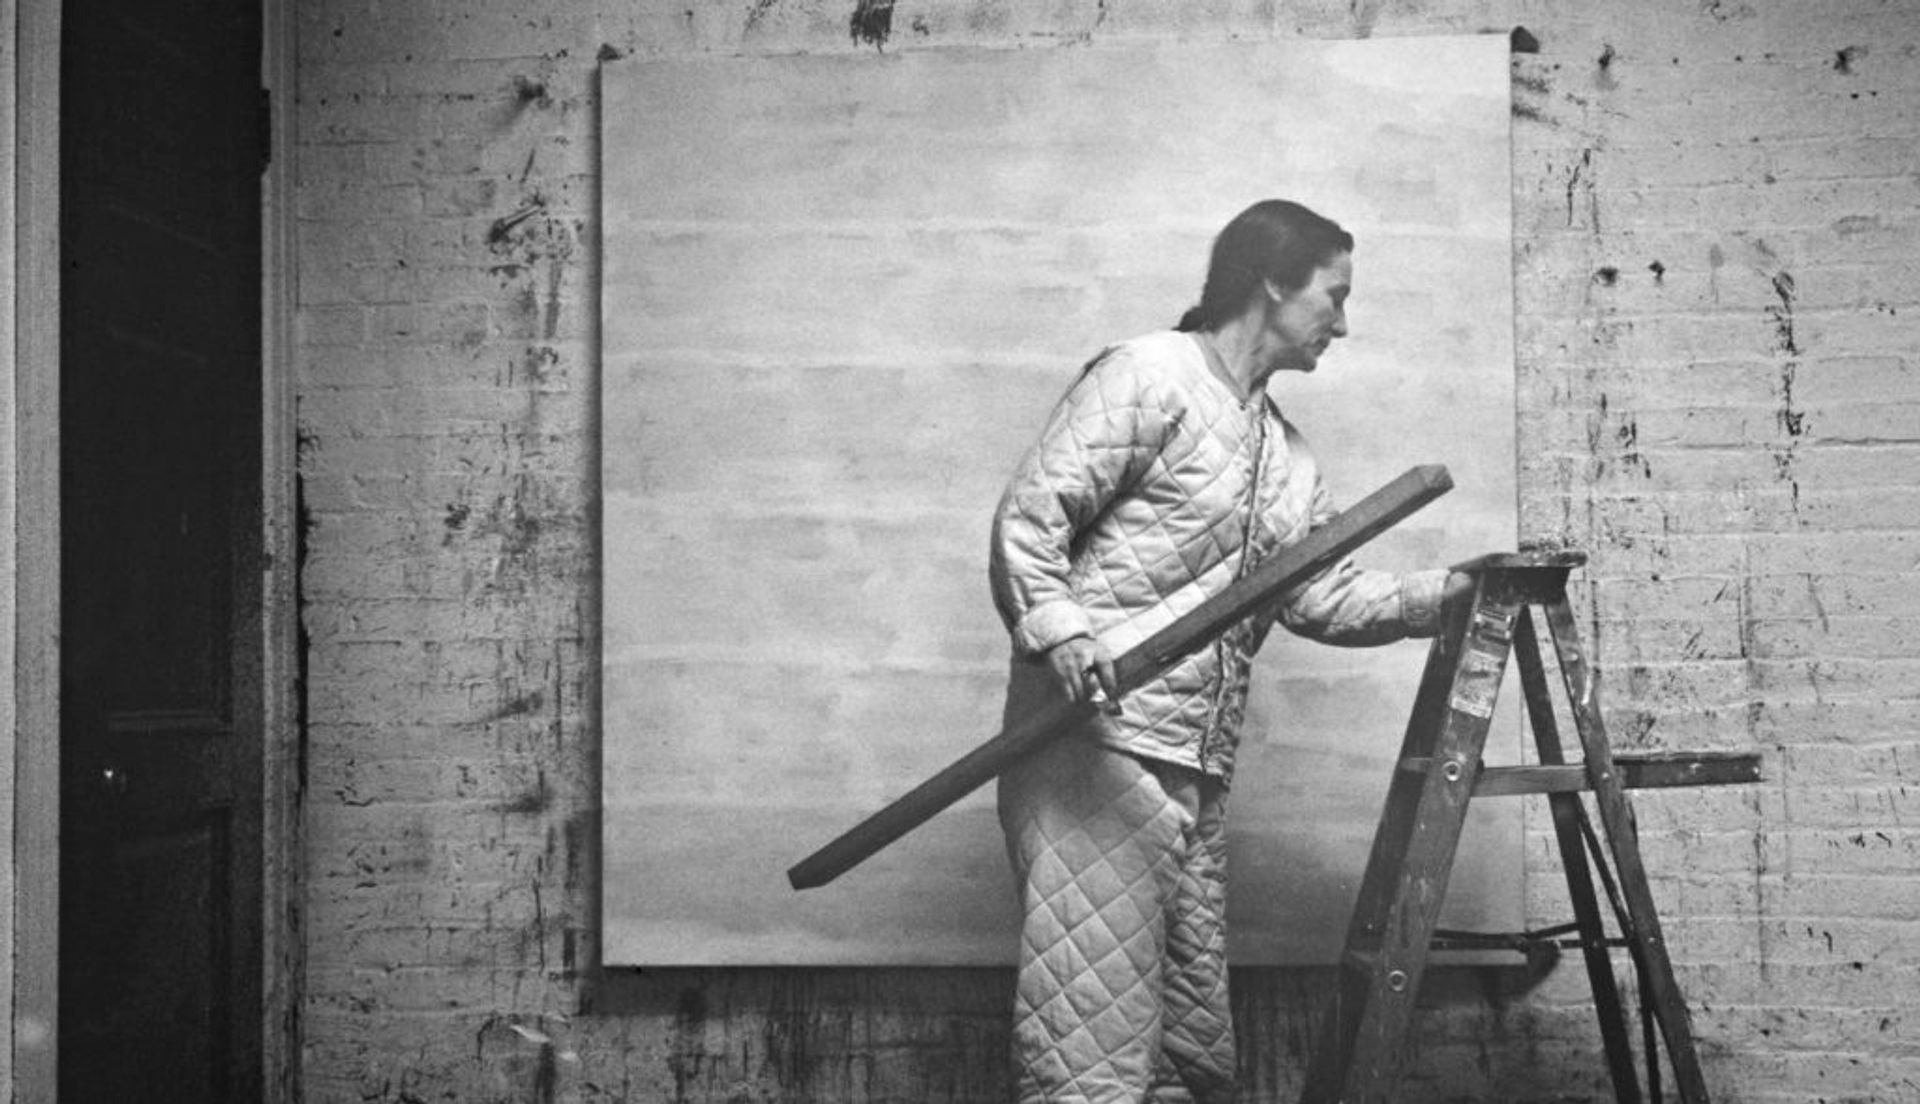 Agnes Martin in her studio. The 2016 lawsuit brought against Pace gallery and the artist's catalogue raisonné committee caused many  foundations to disband their authentication committees. Alexander Liberman Photography Archive, Getty Research Institute, Los Angeles. © J. Paul Getty Trust